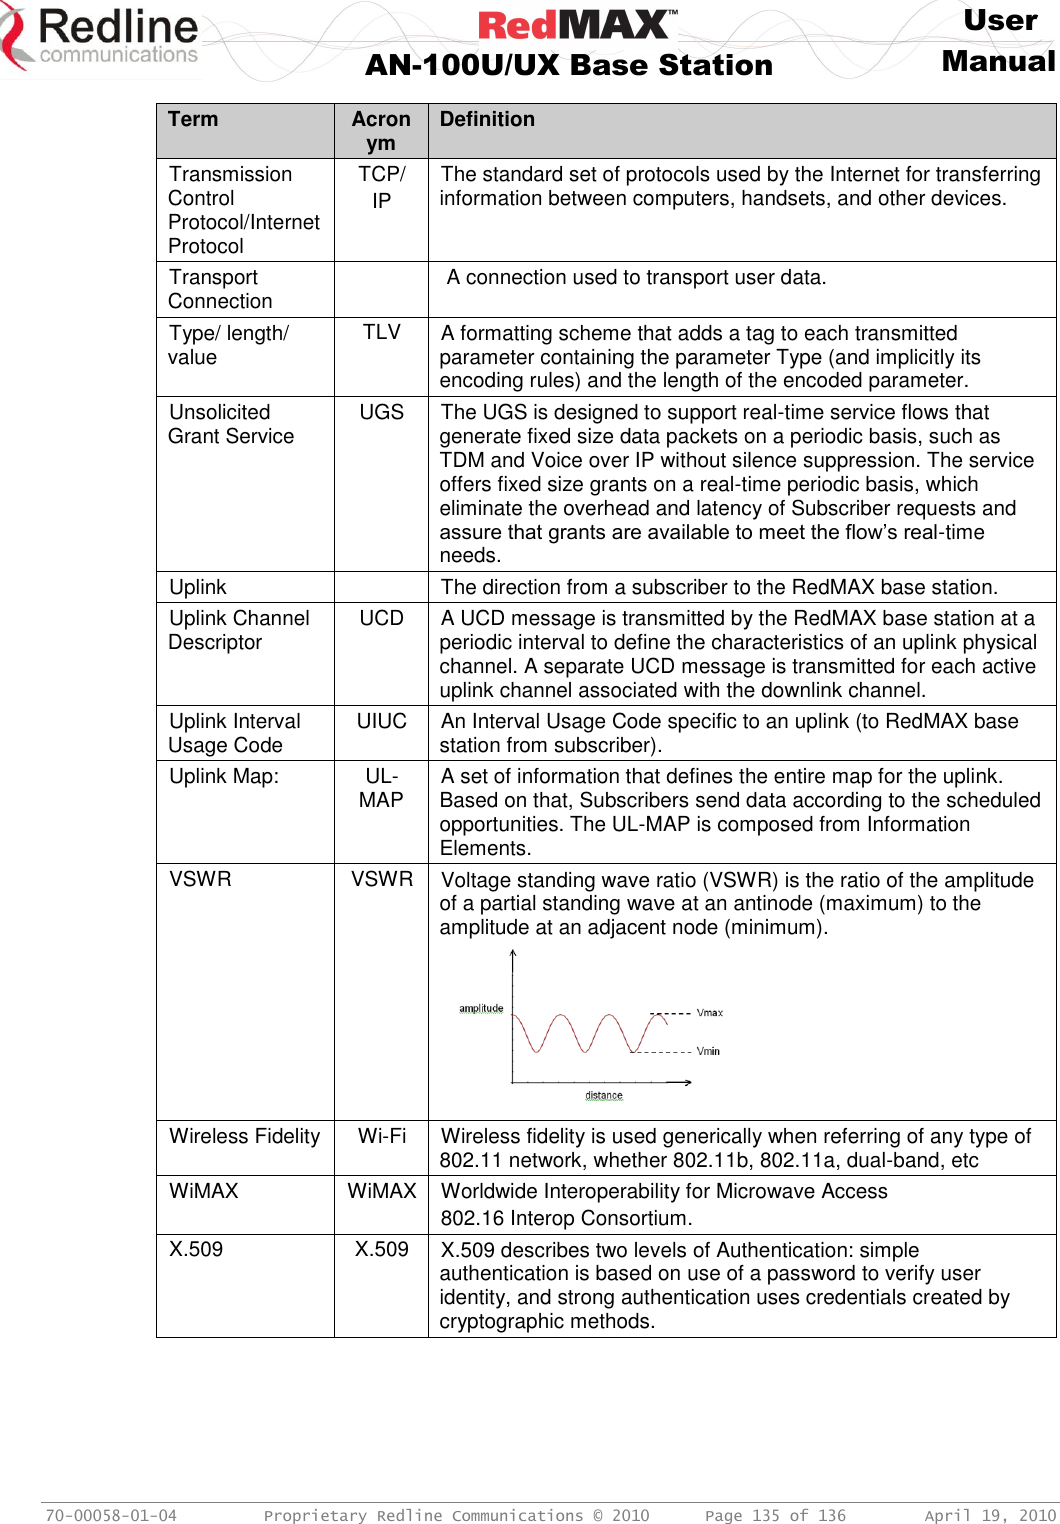     User  AN-100U/UX Base Station Manual   70-00058-01-04  Proprietary Redline Communications © 2010   Page 135 of 136  April 19, 2010 Term Acronym Definition Transmission Control Protocol/Internet Protocol TCP/ IP The standard set of protocols used by the Internet for transferring information between computers, handsets, and other devices.  Transport Connection   A connection used to transport user data. Type/ length/ value  TLV A formatting scheme that adds a tag to each transmitted parameter containing the parameter Type (and implicitly its encoding rules) and the length of the encoded parameter. Unsolicited Grant Service UGS The UGS is designed to support real-time service flows that generate fixed size data packets on a periodic basis, such as TDM and Voice over IP without silence suppression. The service offers fixed size grants on a real-time periodic basis, which eliminate the overhead and latency of Subscriber requests and assure that grants are available to meet the flow’s real-time needs. Uplink  The direction from a subscriber to the RedMAX base station. Uplink Channel Descriptor  UCD A UCD message is transmitted by the RedMAX base station at a periodic interval to define the characteristics of an uplink physical channel. A separate UCD message is transmitted for each active uplink channel associated with the downlink channel. Uplink Interval Usage Code UIUC An Interval Usage Code specific to an uplink (to RedMAX base station from subscriber). Uplink Map:  UL-MAP A set of information that defines the entire map for the uplink. Based on that, Subscribers send data according to the scheduled opportunities. The UL-MAP is composed from Information Elements. VSWR VSWR Voltage standing wave ratio (VSWR) is the ratio of the amplitude of a partial standing wave at an antinode (maximum) to the amplitude at an adjacent node (minimum).    Wireless Fidelity Wi-Fi Wireless fidelity is used generically when referring of any type of 802.11 network, whether 802.11b, 802.11a, dual-band, etc WiMAX WiMAX Worldwide Interoperability for Microwave Access 802.16 Interop Consortium. X.509 X.509 X.509 describes two levels of Authentication: simple authentication is based on use of a password to verify user identity, and strong authentication uses credentials created by cryptographic methods.    